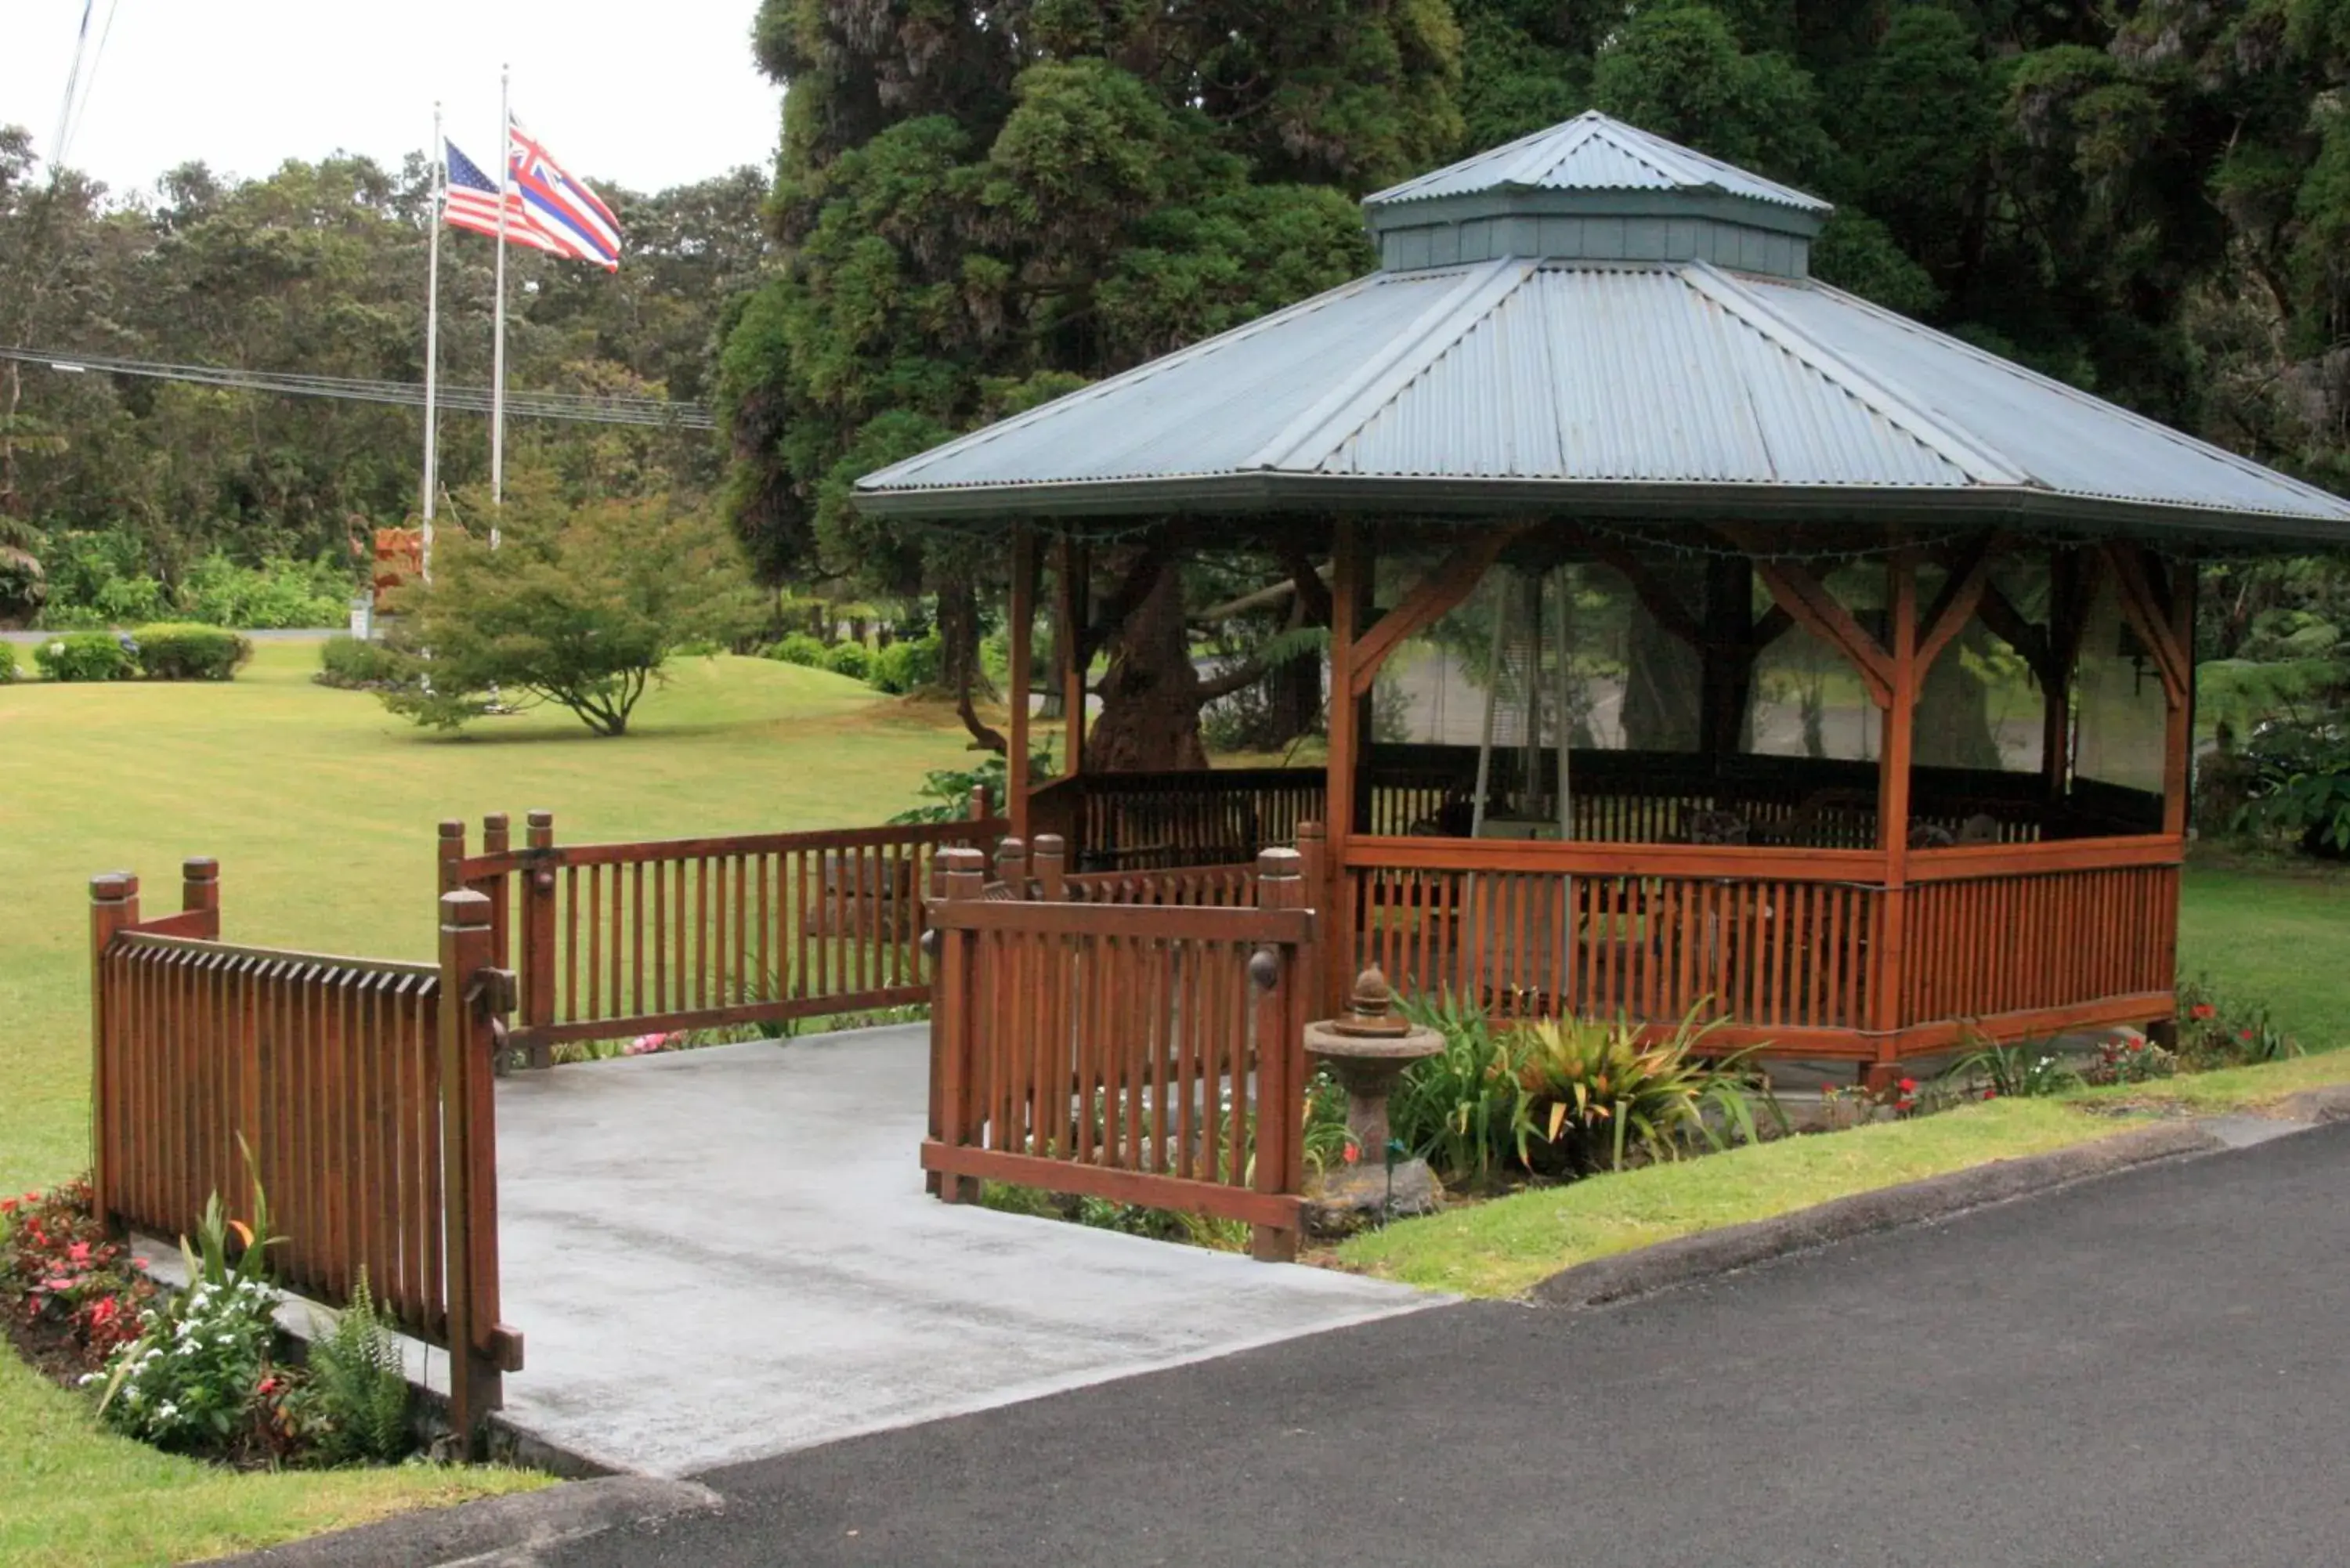 Area and facilities in Kilauea Lodge and Restaurant